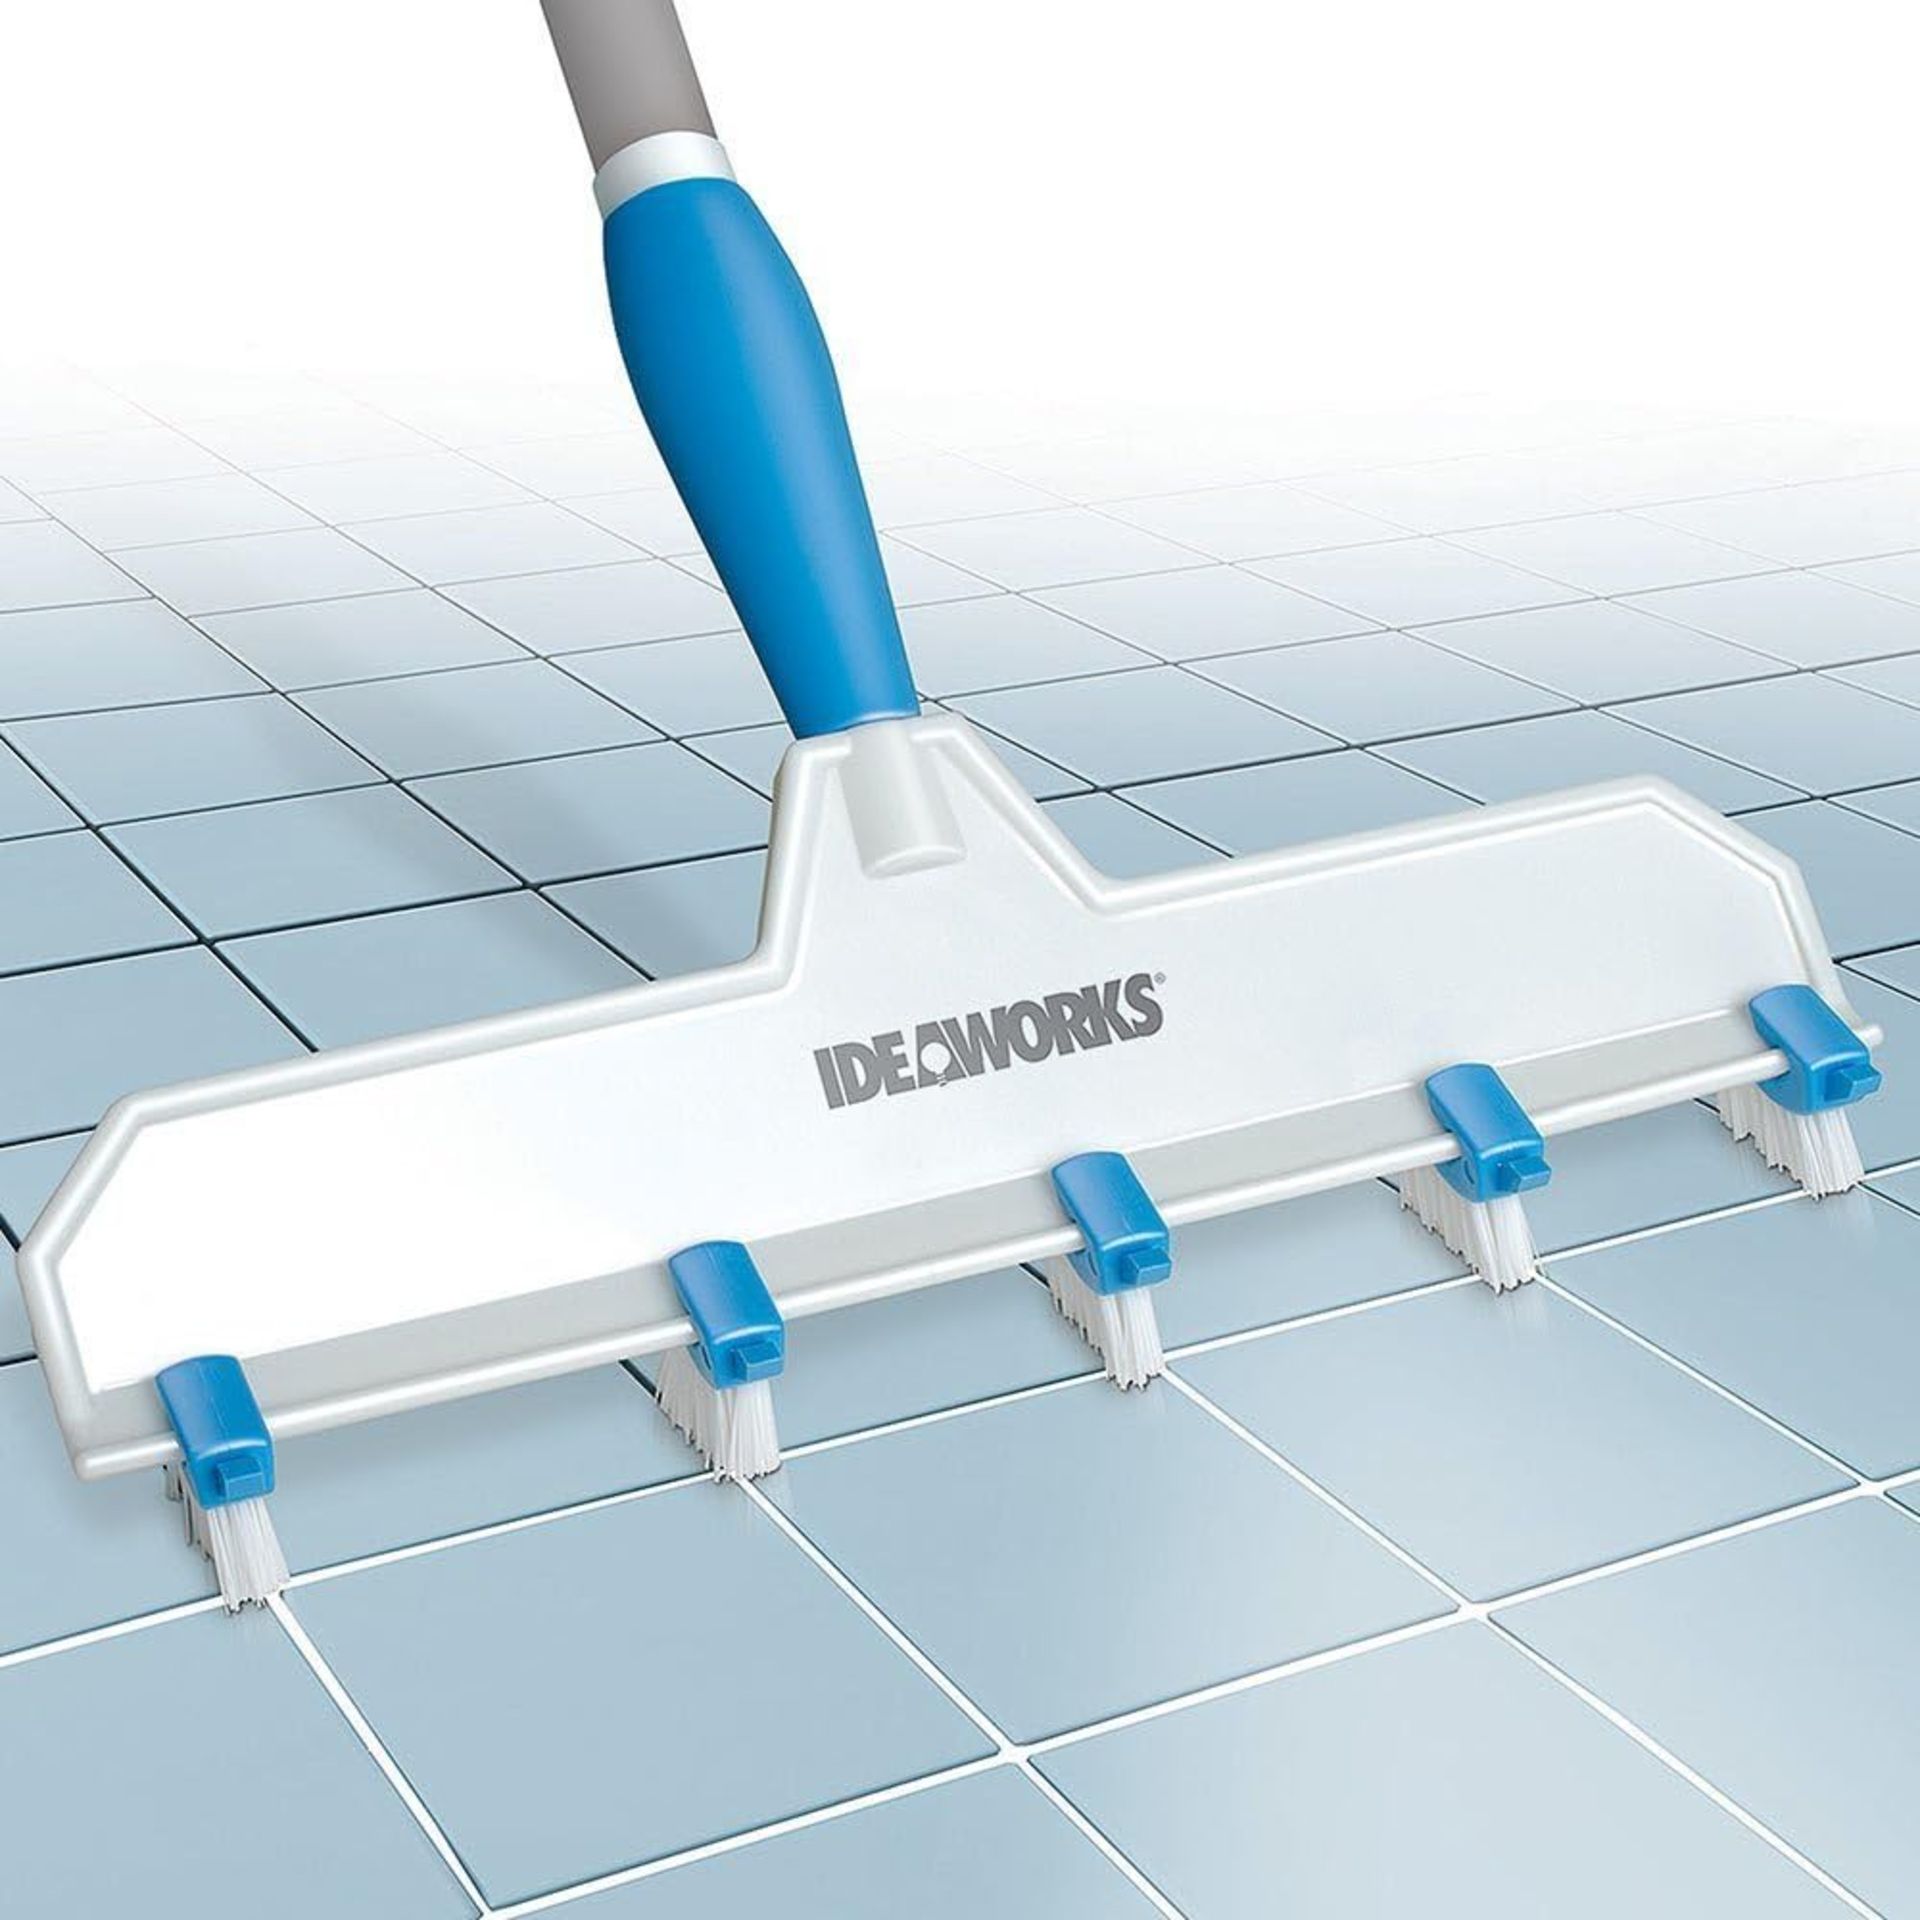 15x BRAND NEW IDEAWORKS Adjustable Grout Cleaning Brush for Tiles. RRP £16.95 EACH. Rubberised - Image 2 of 2